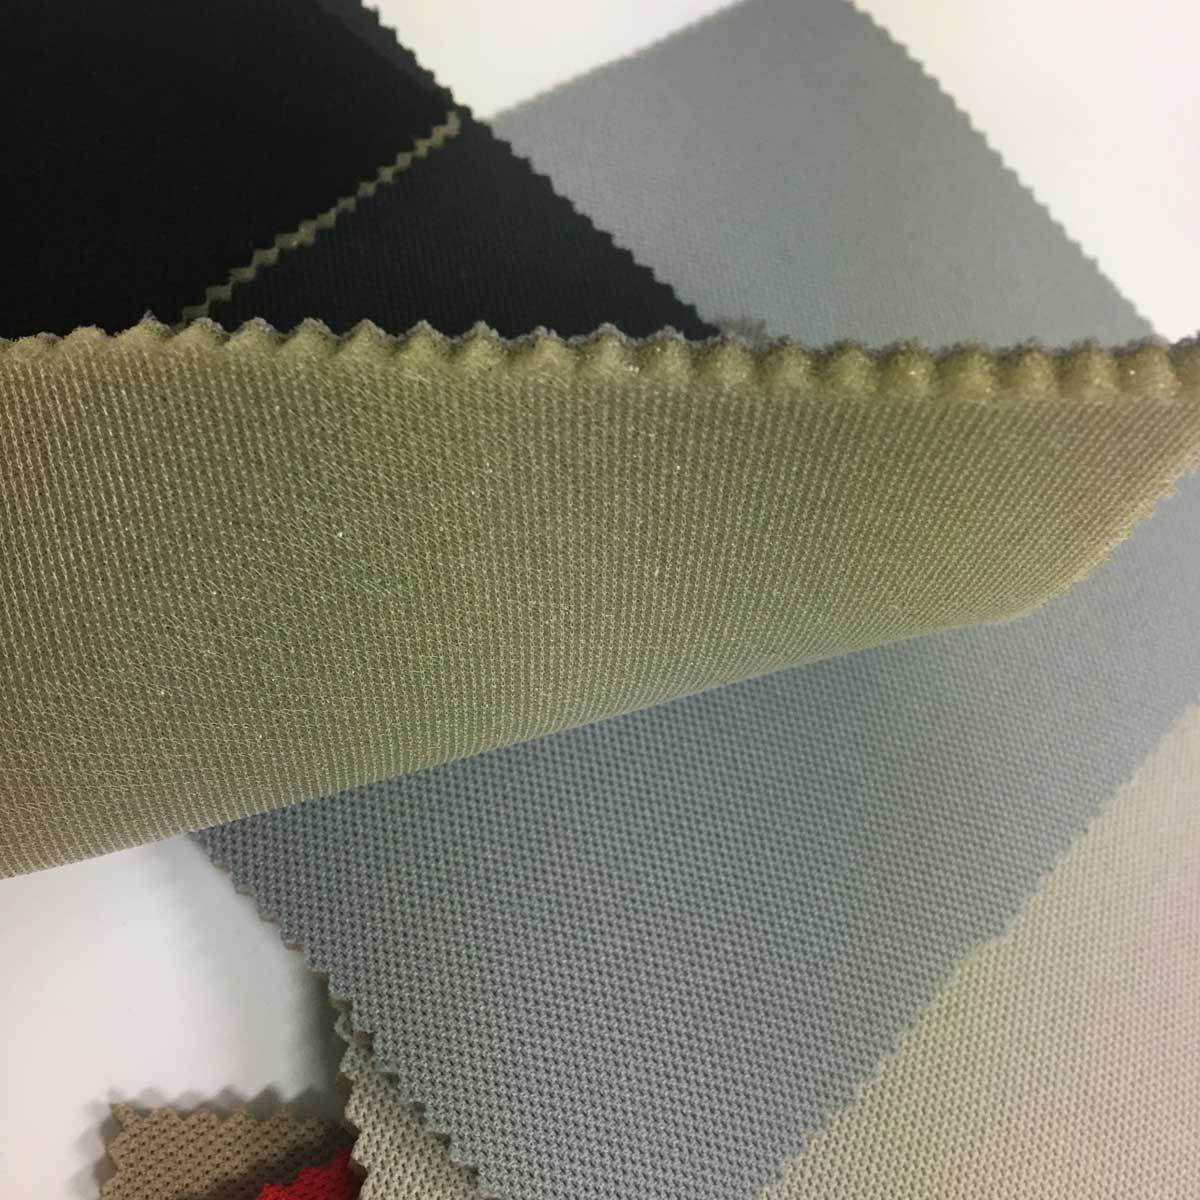 [ automobile interior material ] seat repair ceiling roof lining head liner # beige back surface 5mm urethane trim ceiling trim for re tongue fireproof # sport knitted 